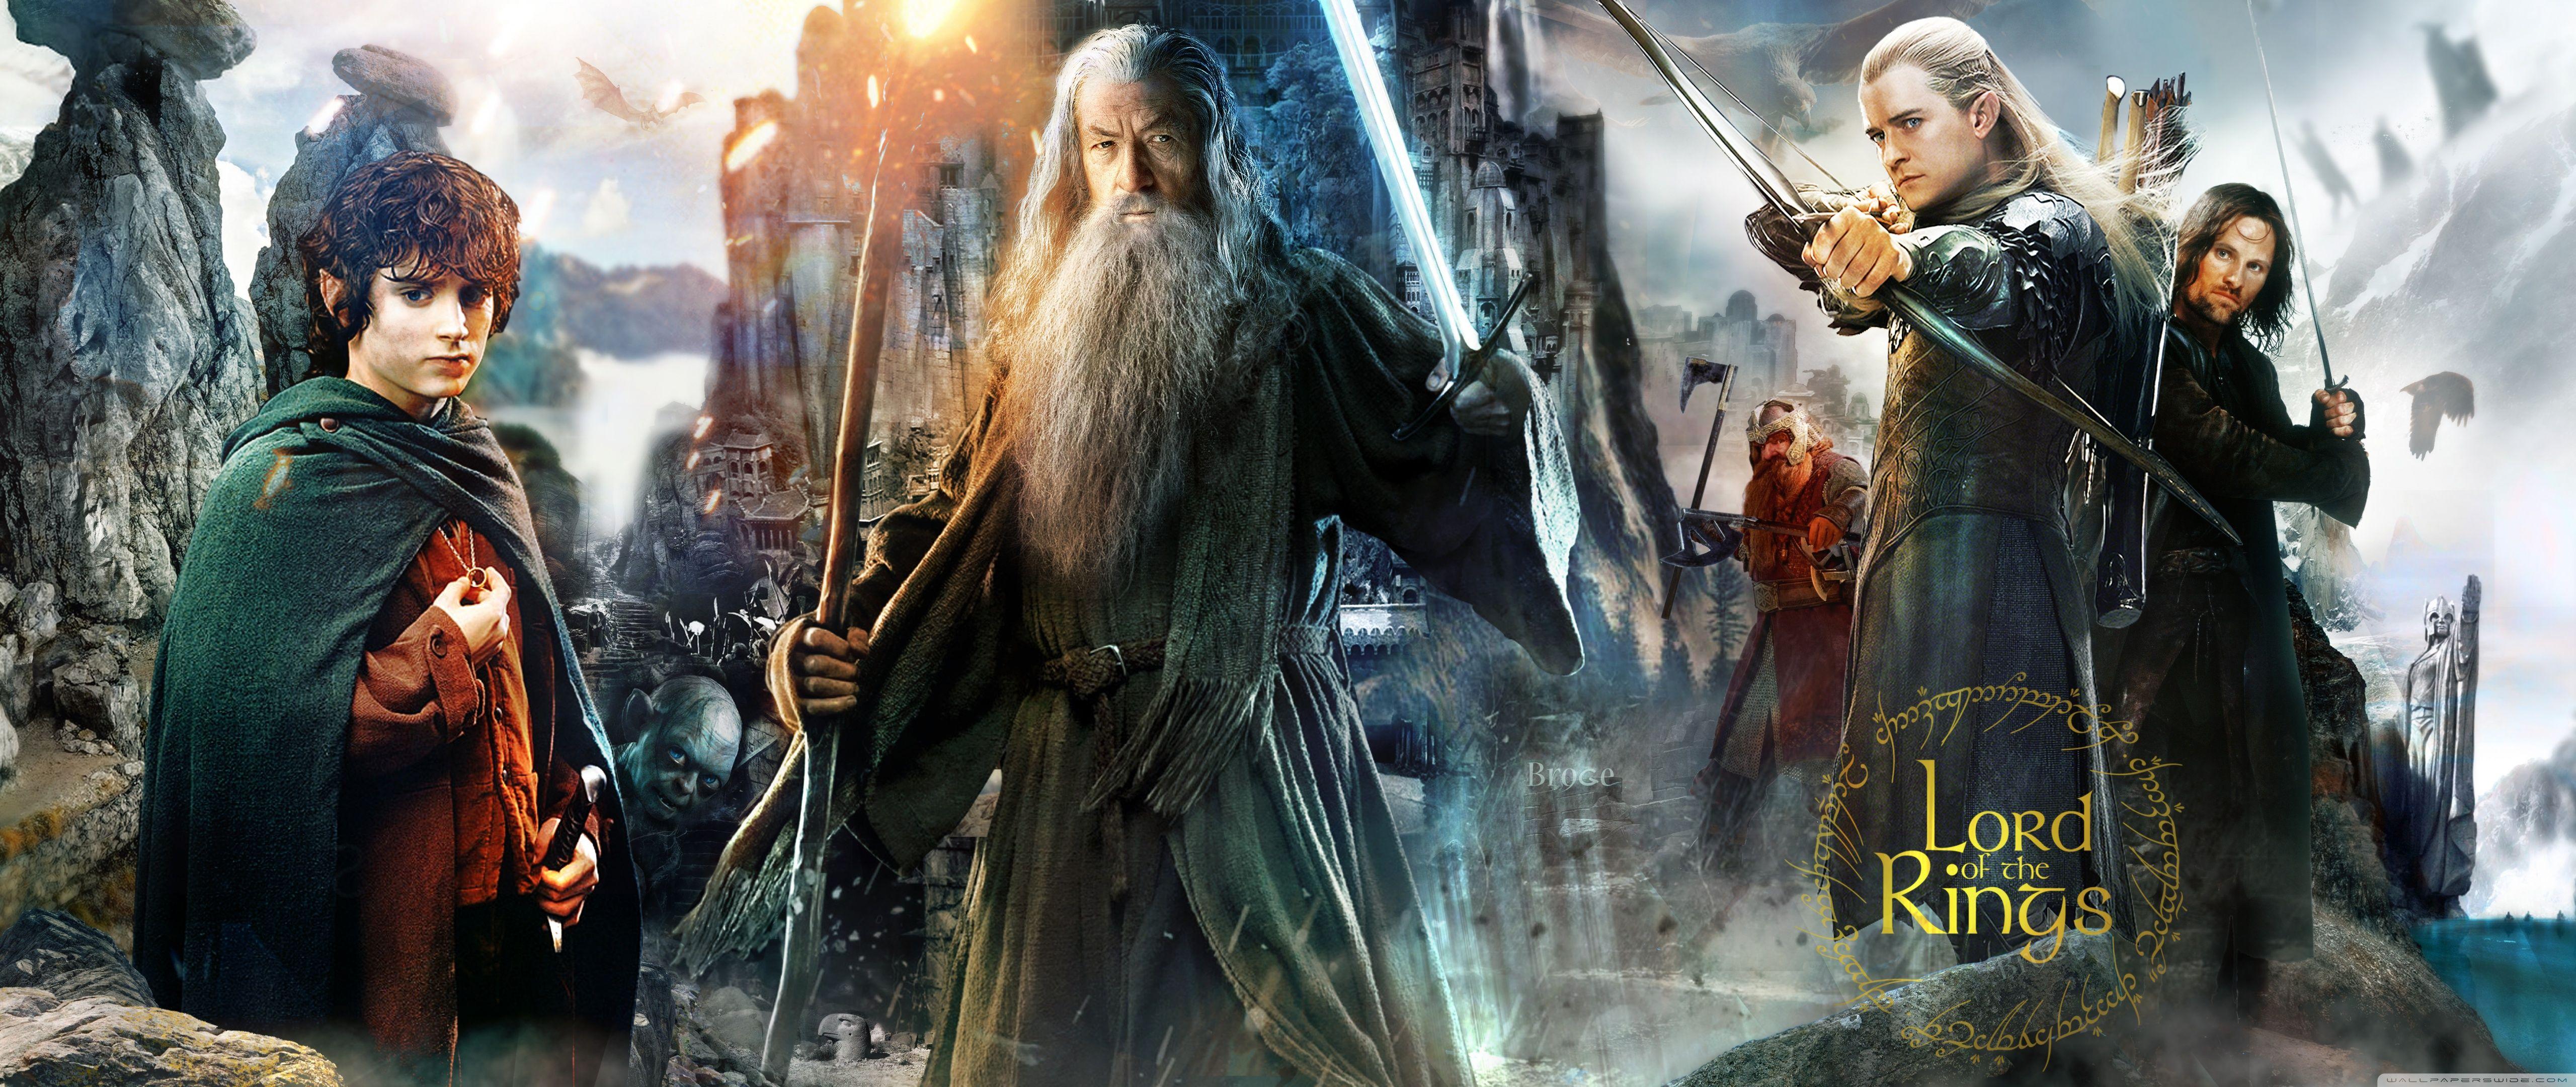 4K Lord of the Rings Wallpapers - Top